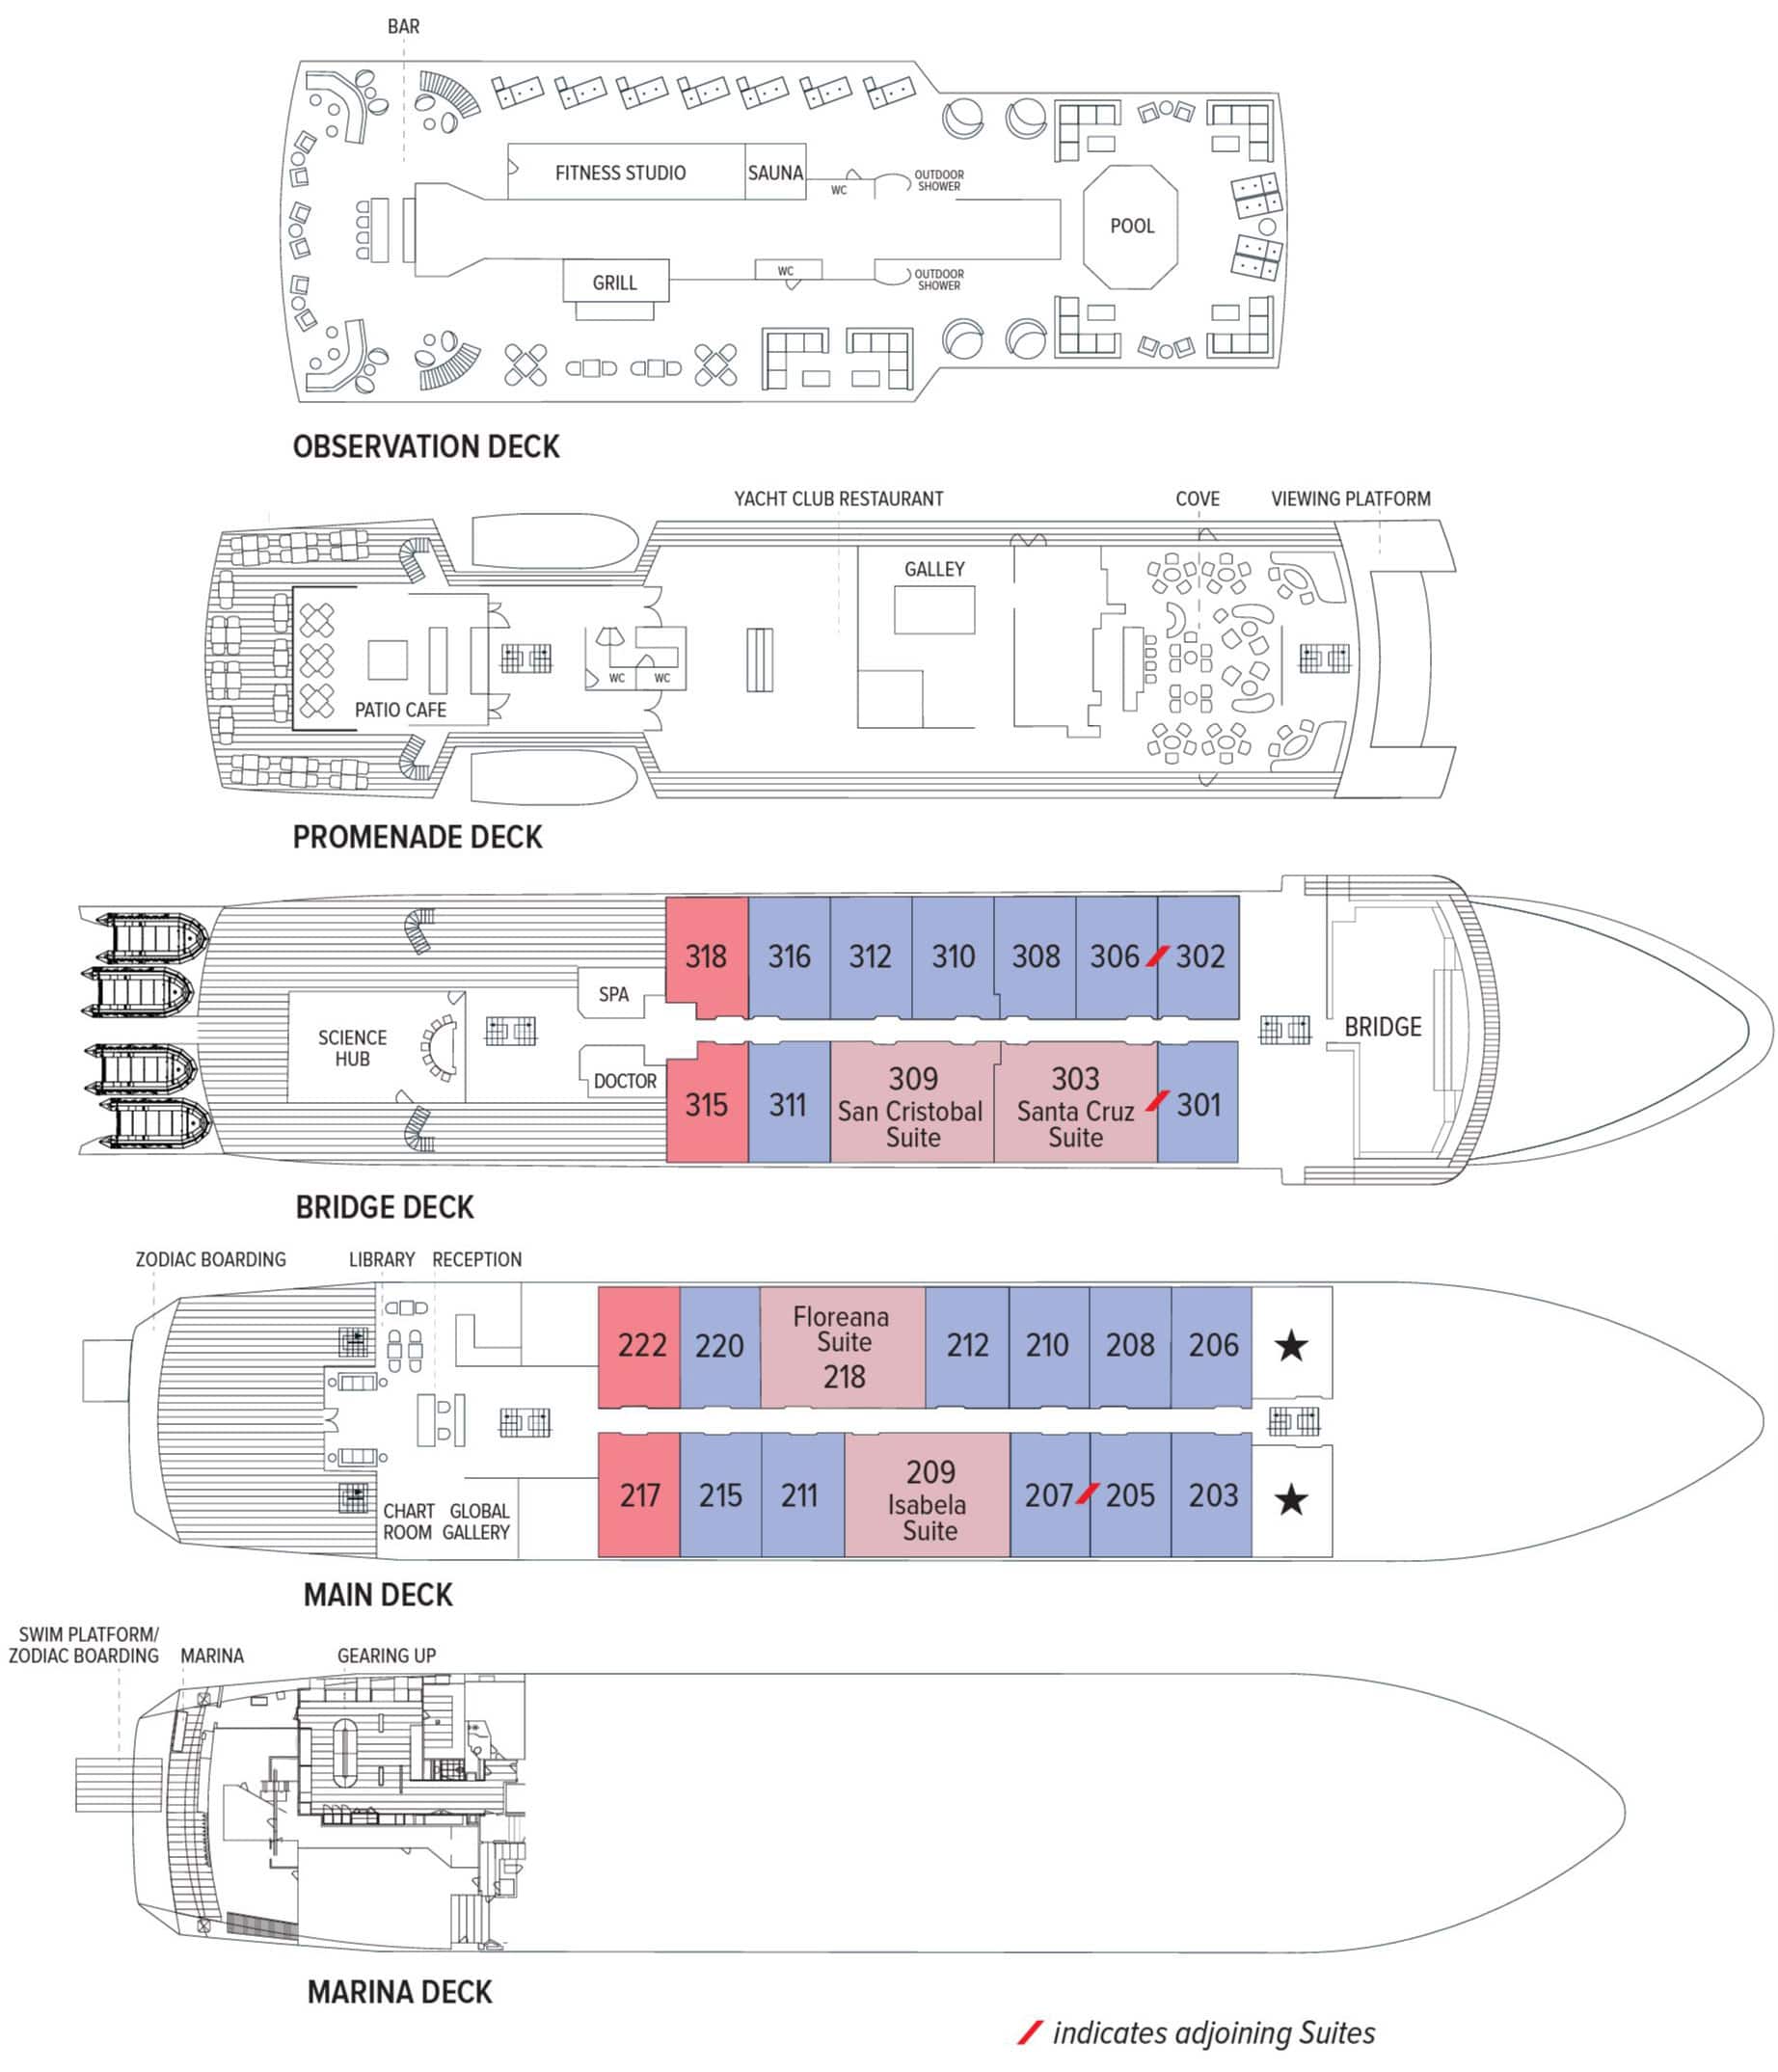 National Geographic Islander II Galapagos luxury ship deck plan with 5 guest levels, 2 with cabins in 3 categories.